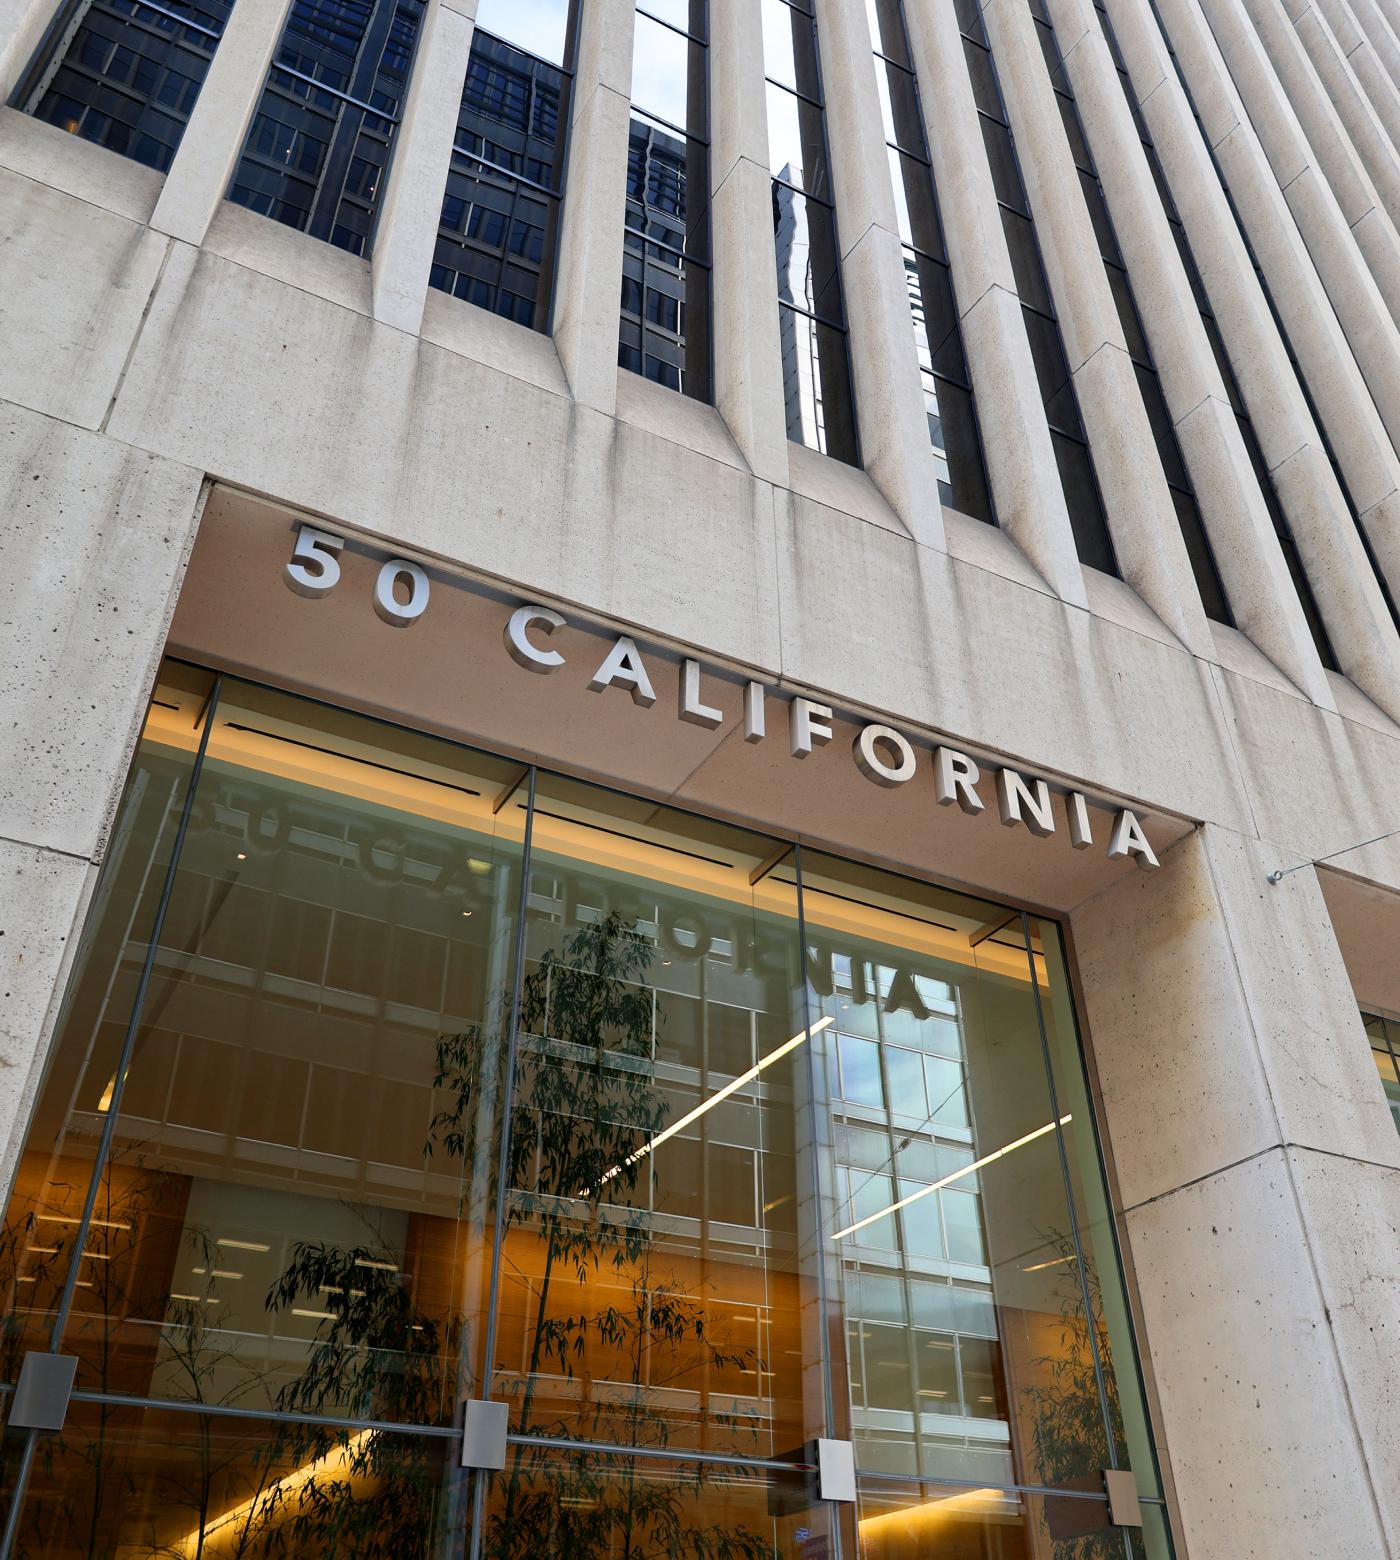 View of 50 California building signage from the street.